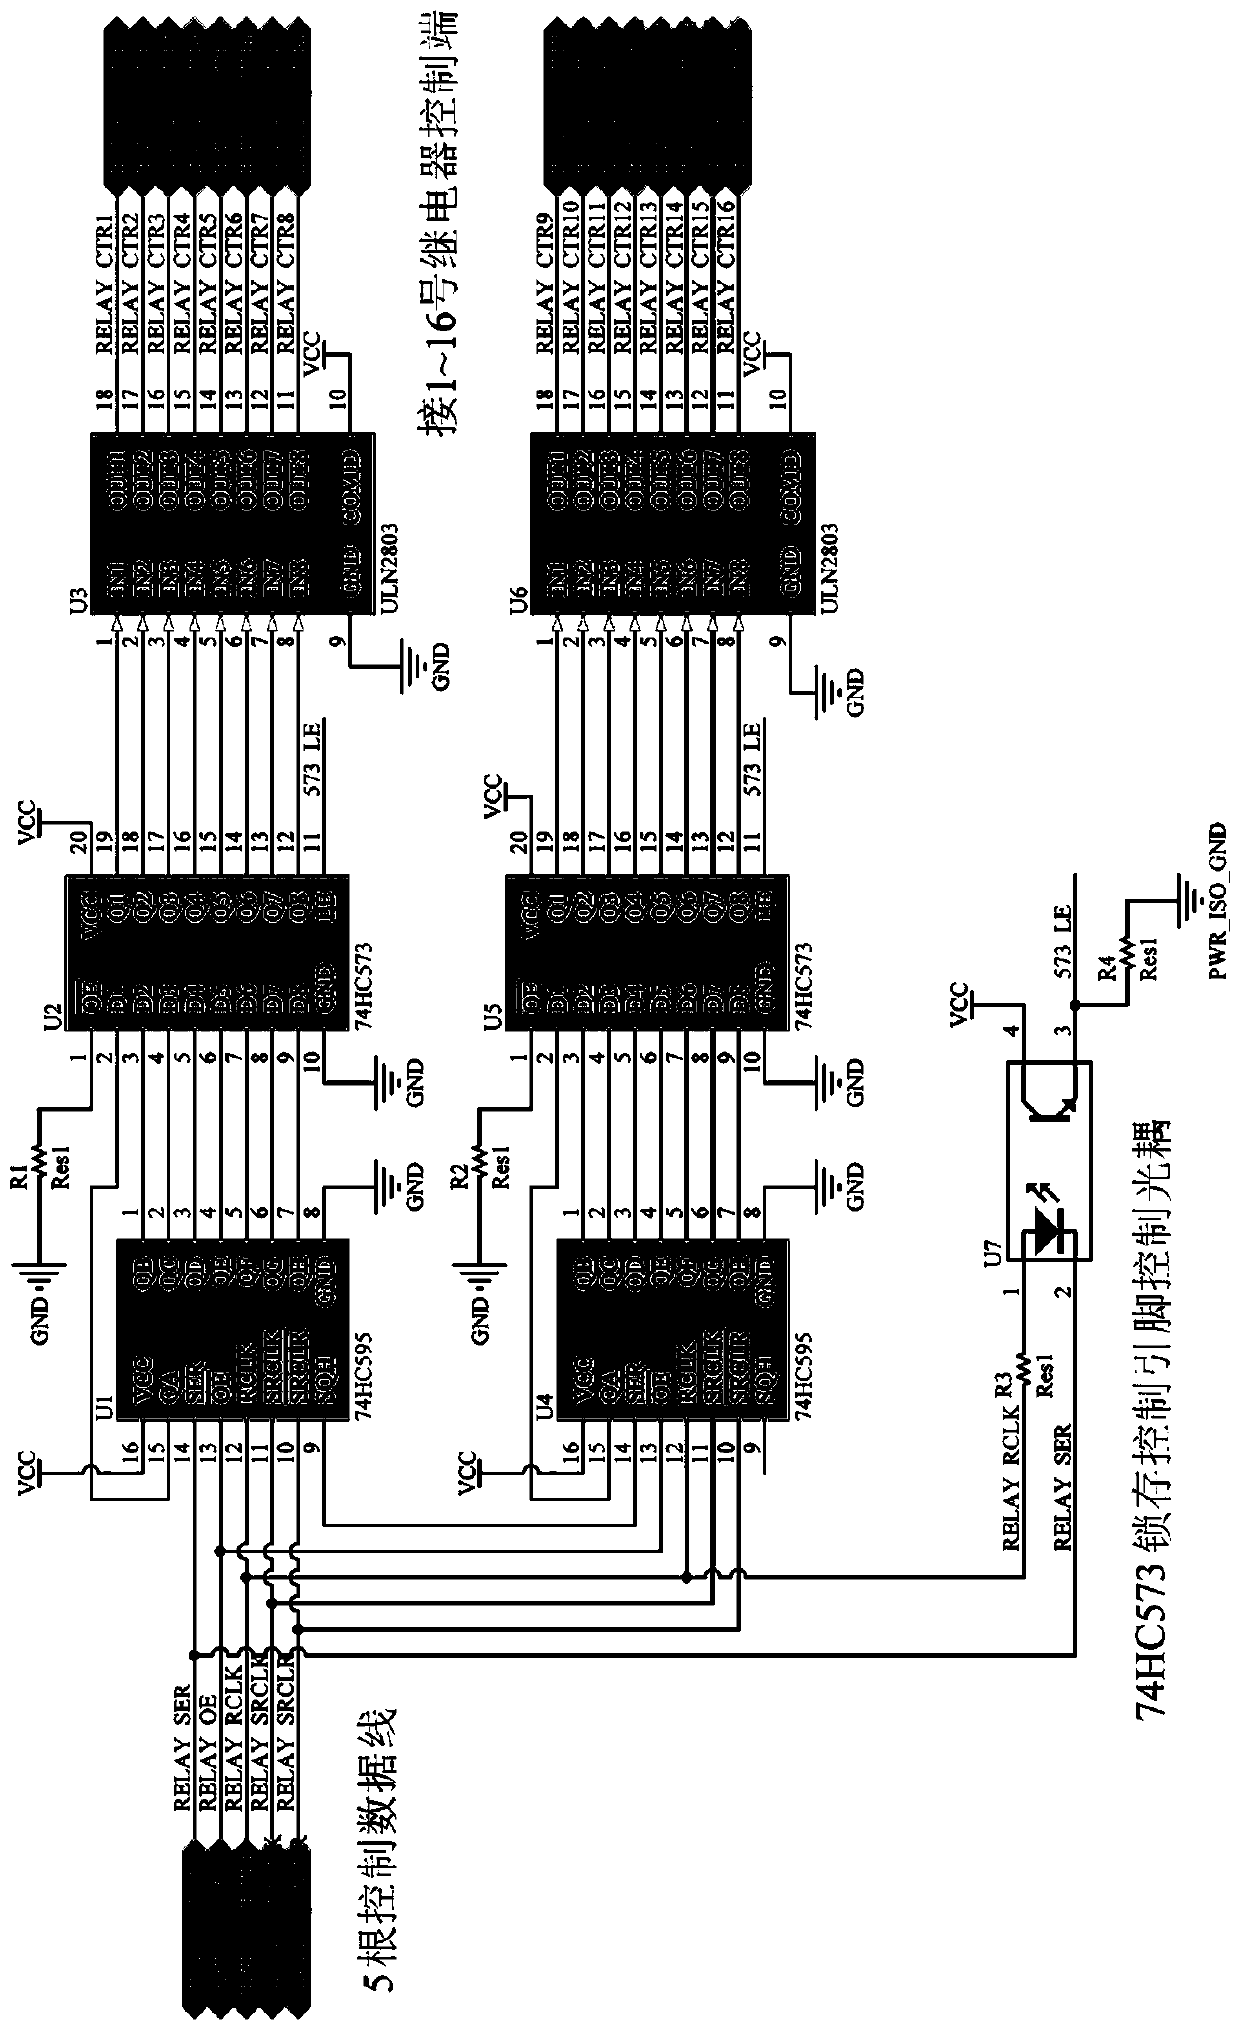 Serial control interface circuit for multiple relays